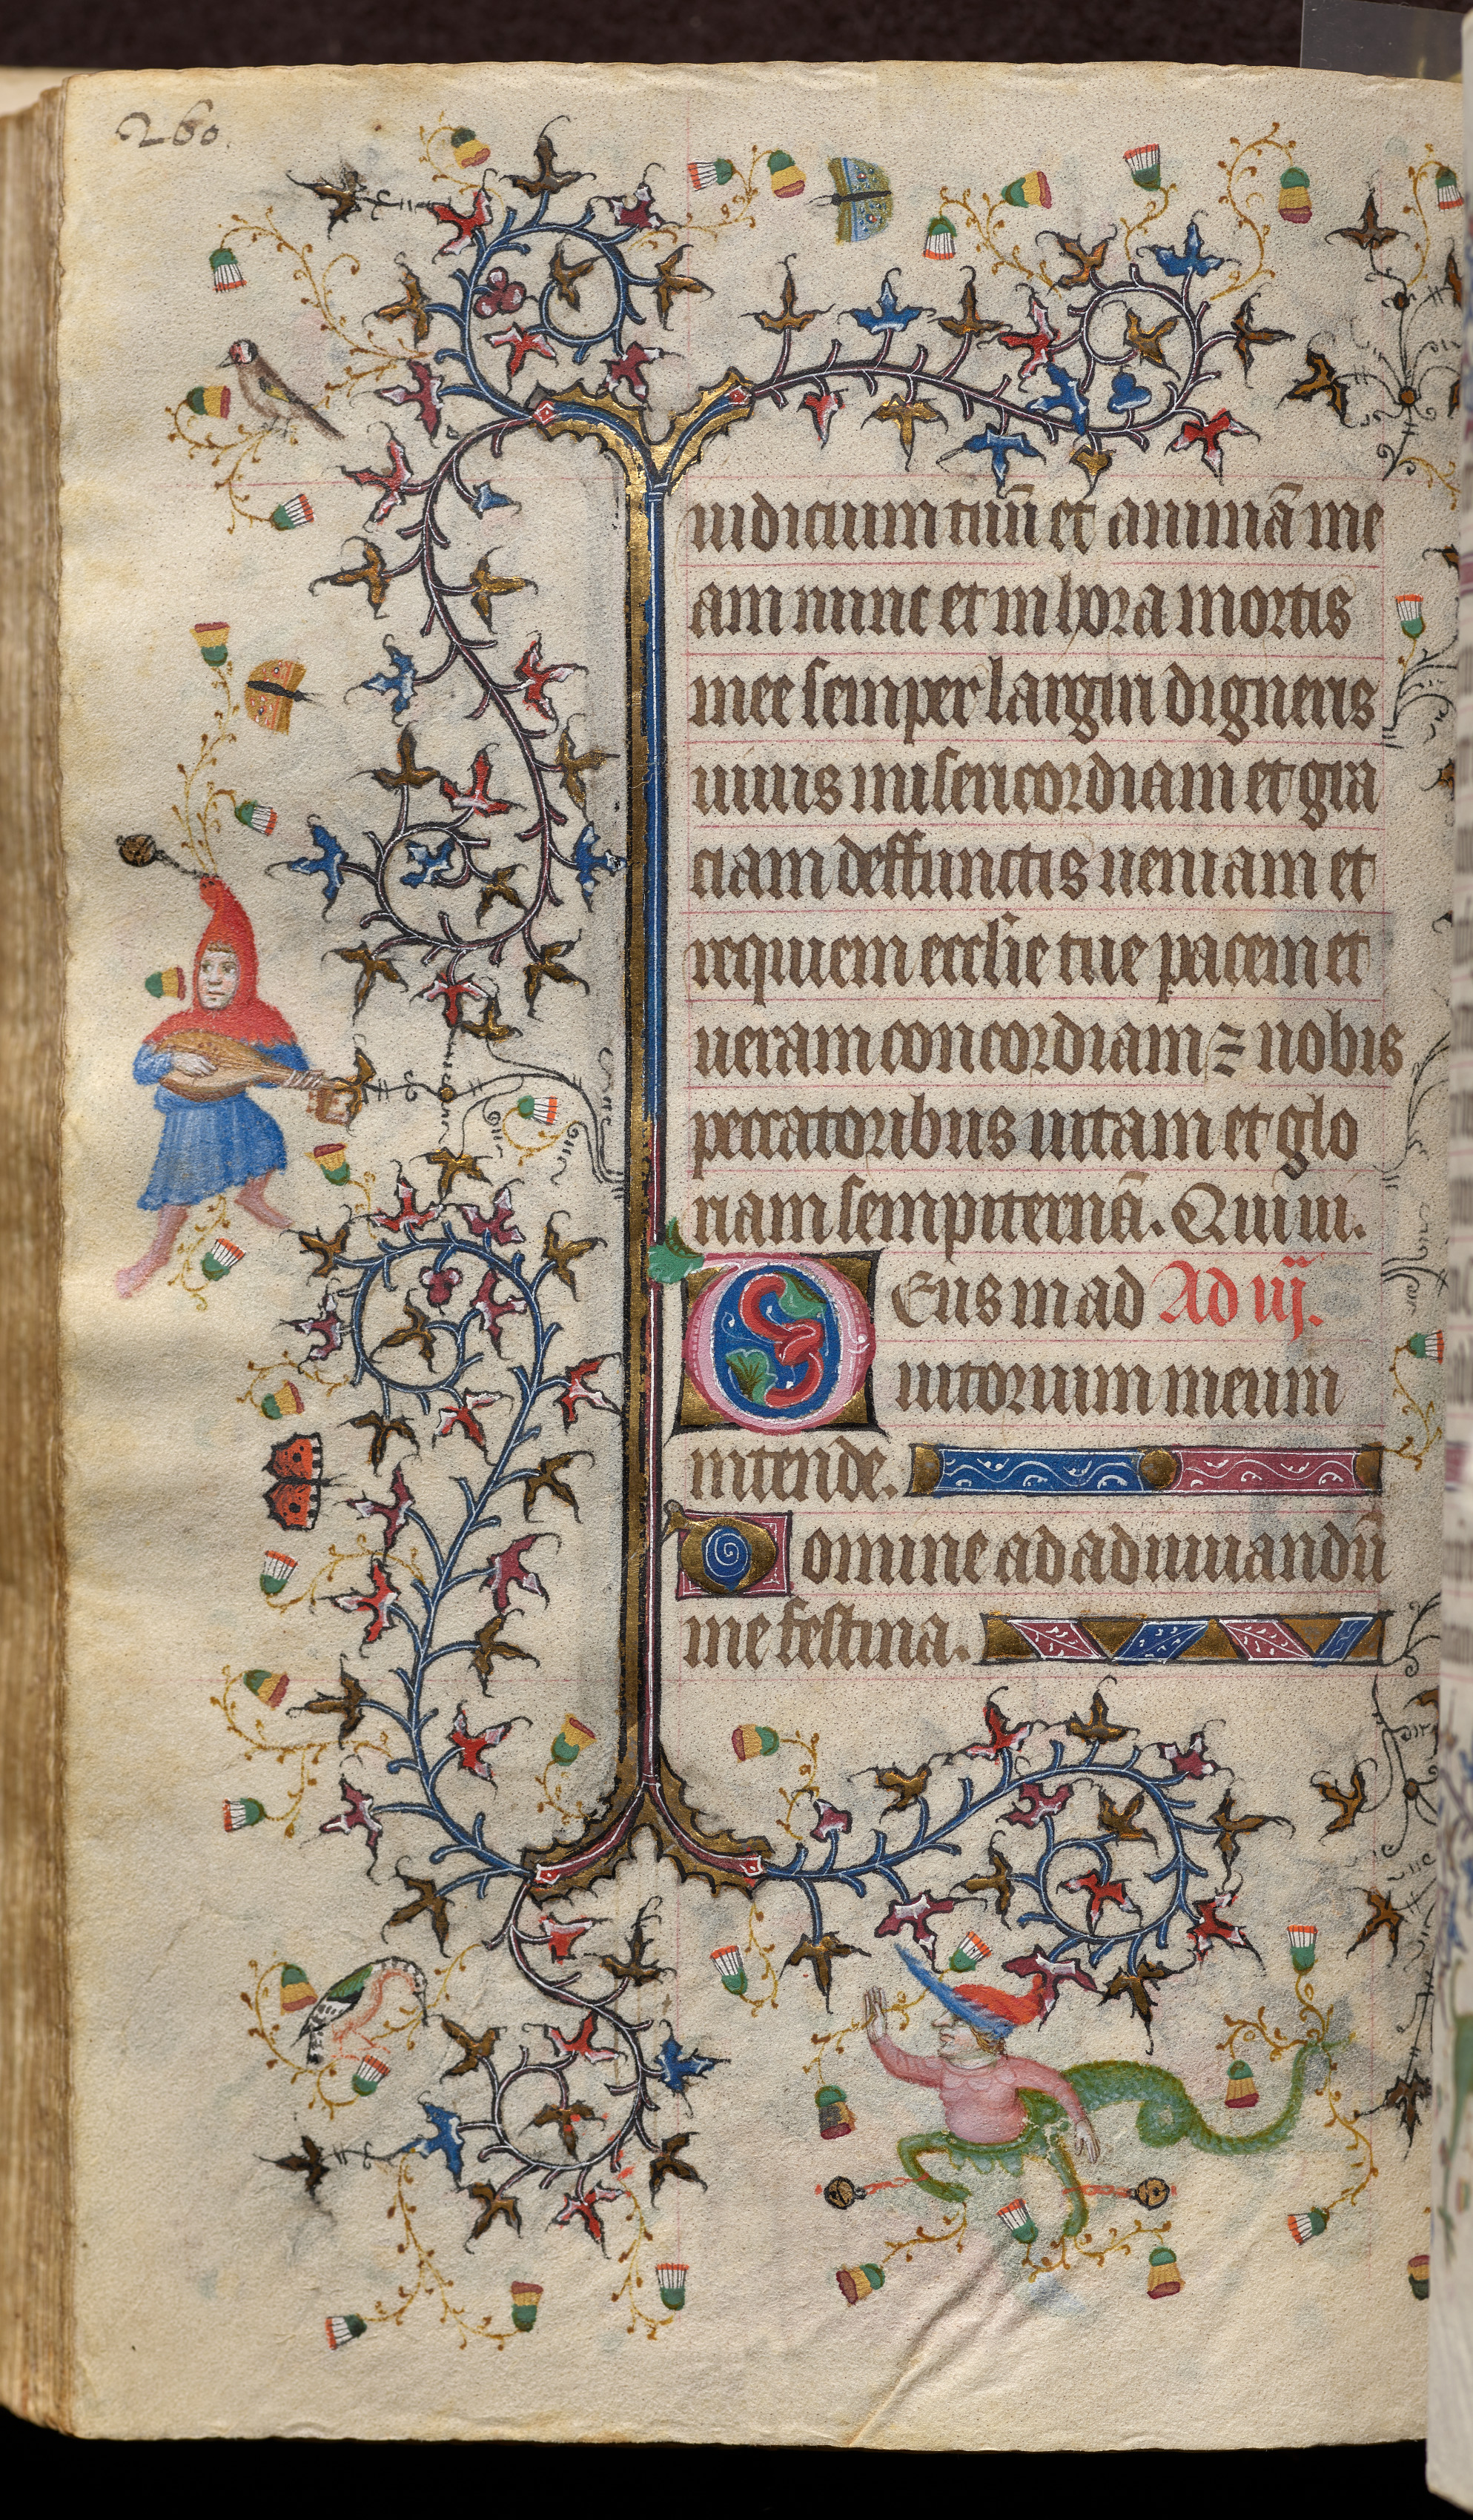 Hours of Charles the Noble, King of Navarre (1361-1425): fol. 130v, Text